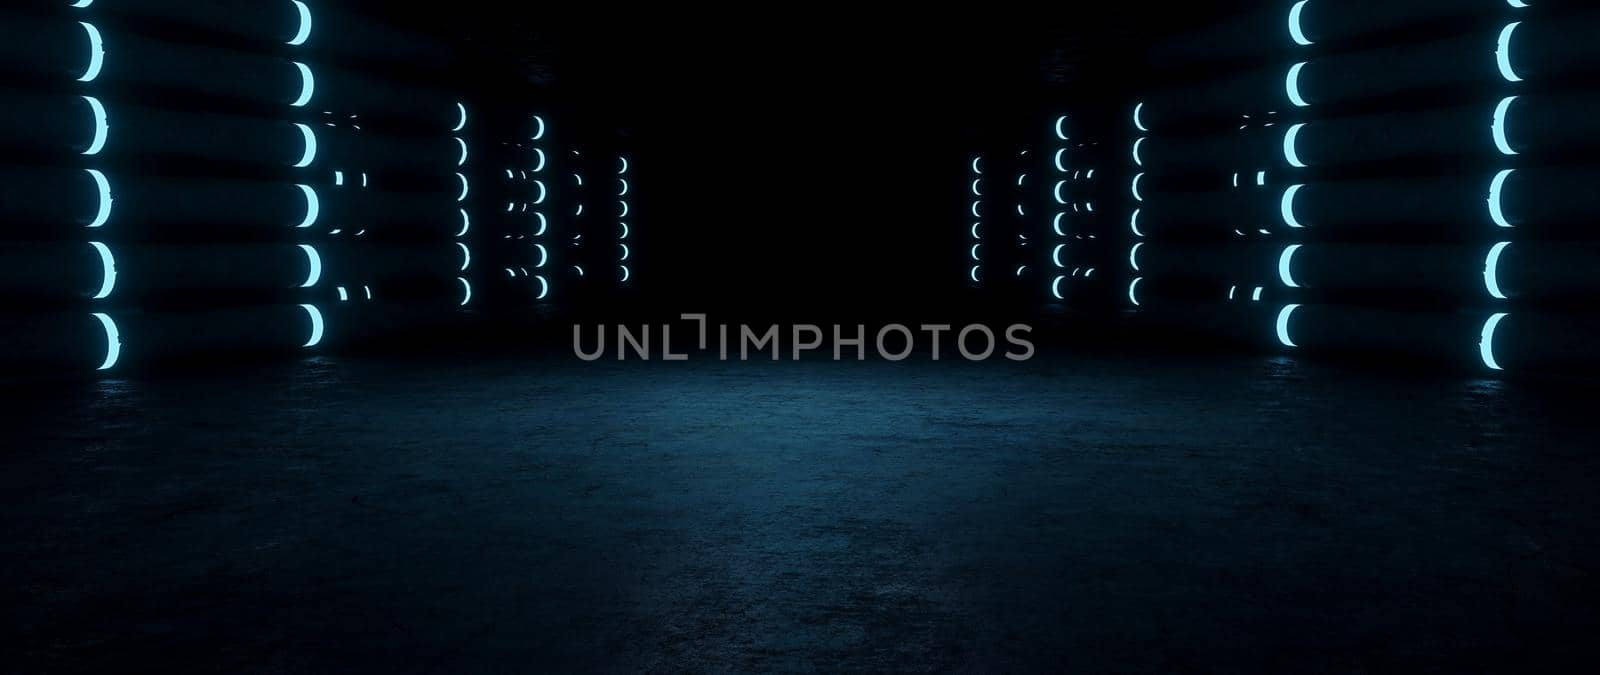 Elegant Club Underground Scene Dimmed Black Abstract Background Concept Of The Future For Graphic Design 3D Illustration by yay_lmrb